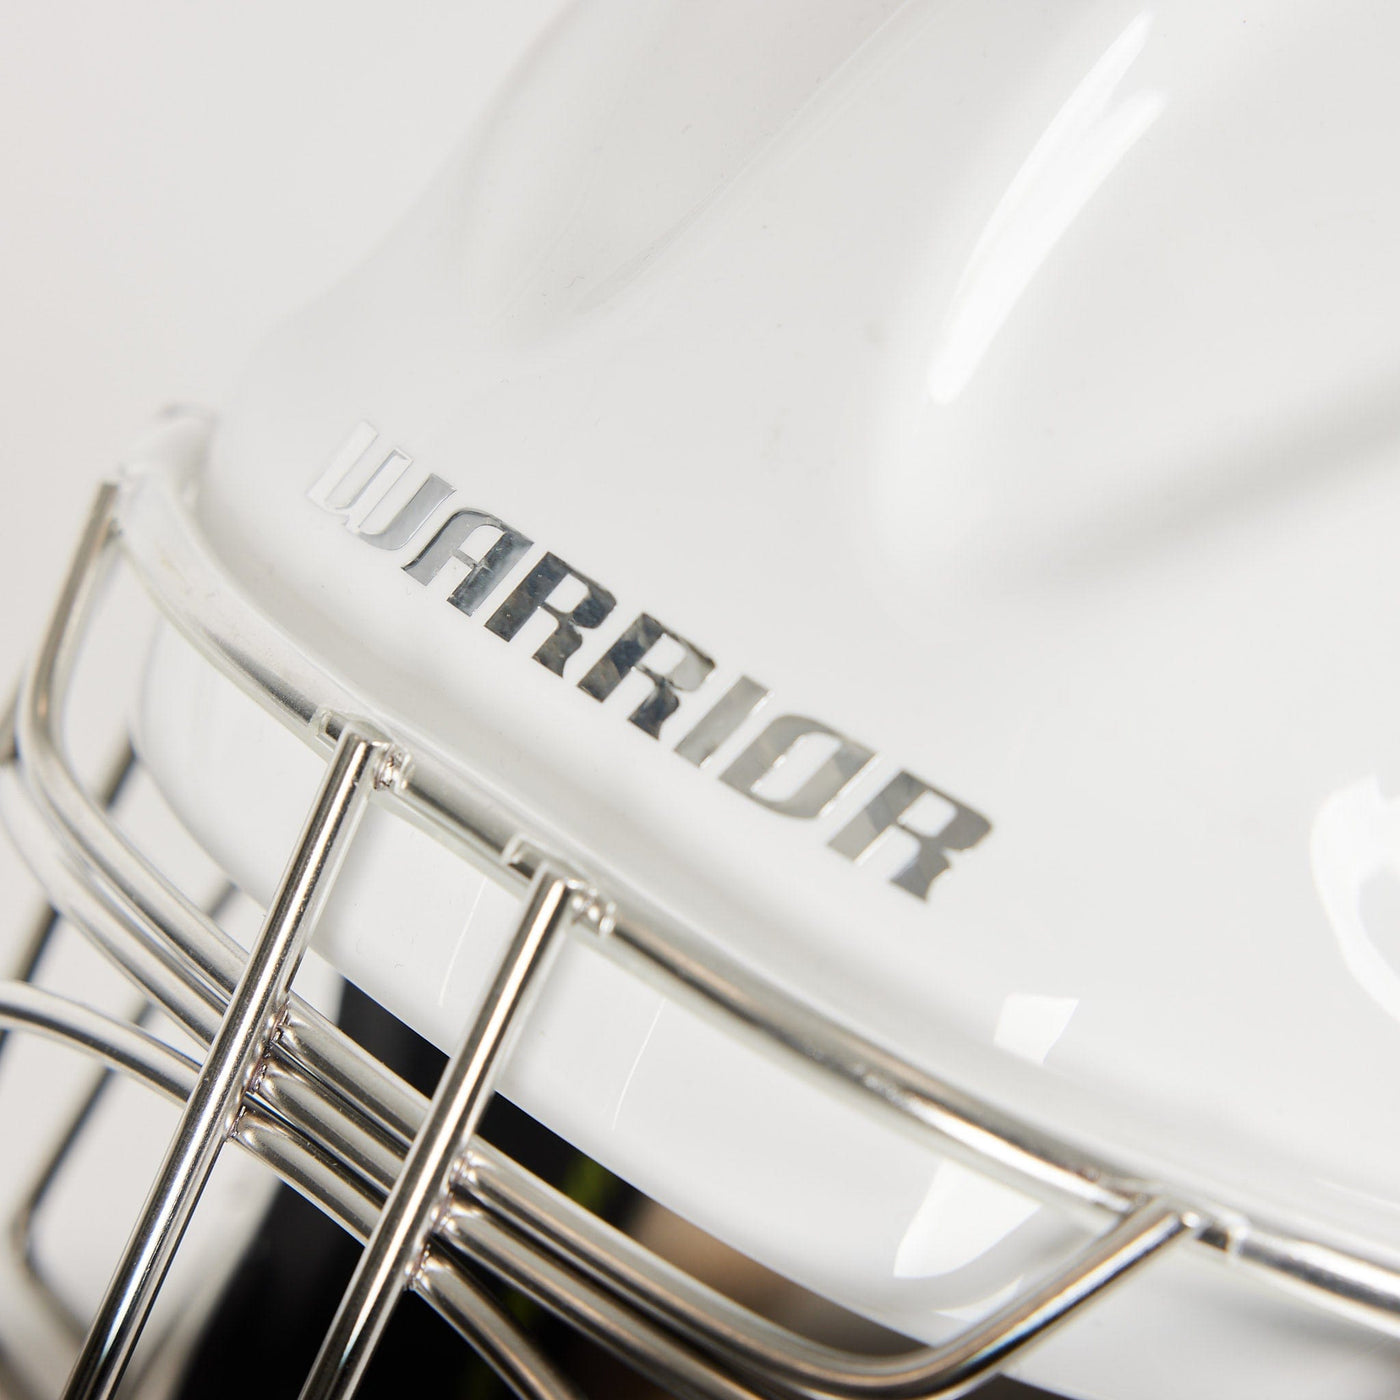 Warrior Ritual F2 E+ Senior Goalie Mask - Pro Certified - The Hockey Shop Source For Sports